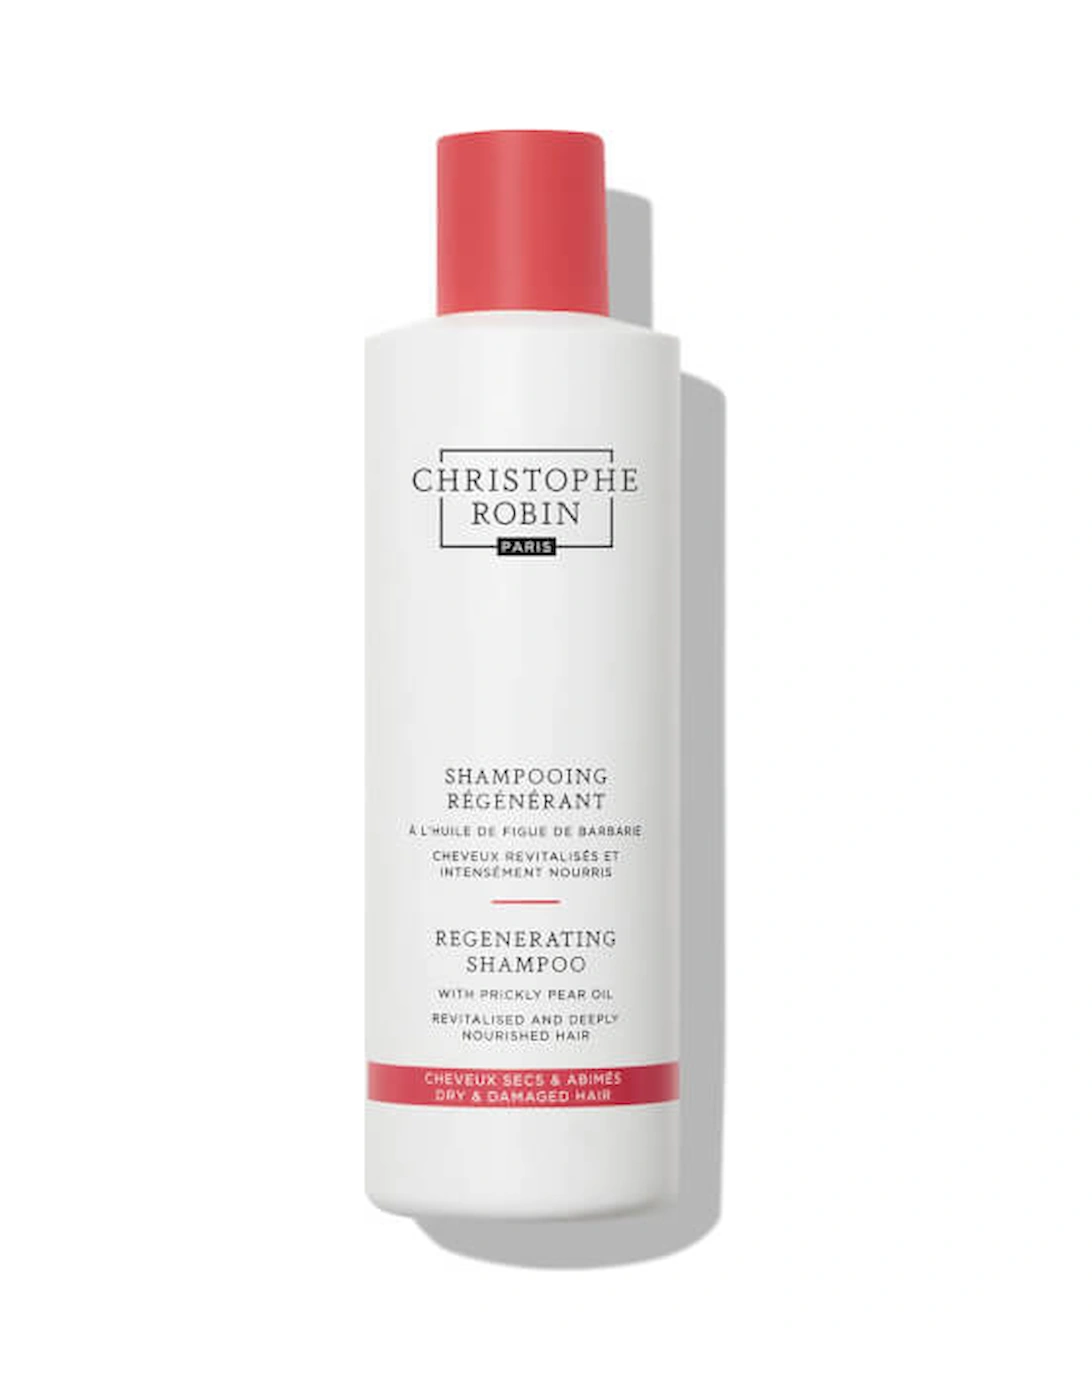 Regenerating Shampoo with Prickly Pear Oil 250ml - Christophe Robin, 2 of 1